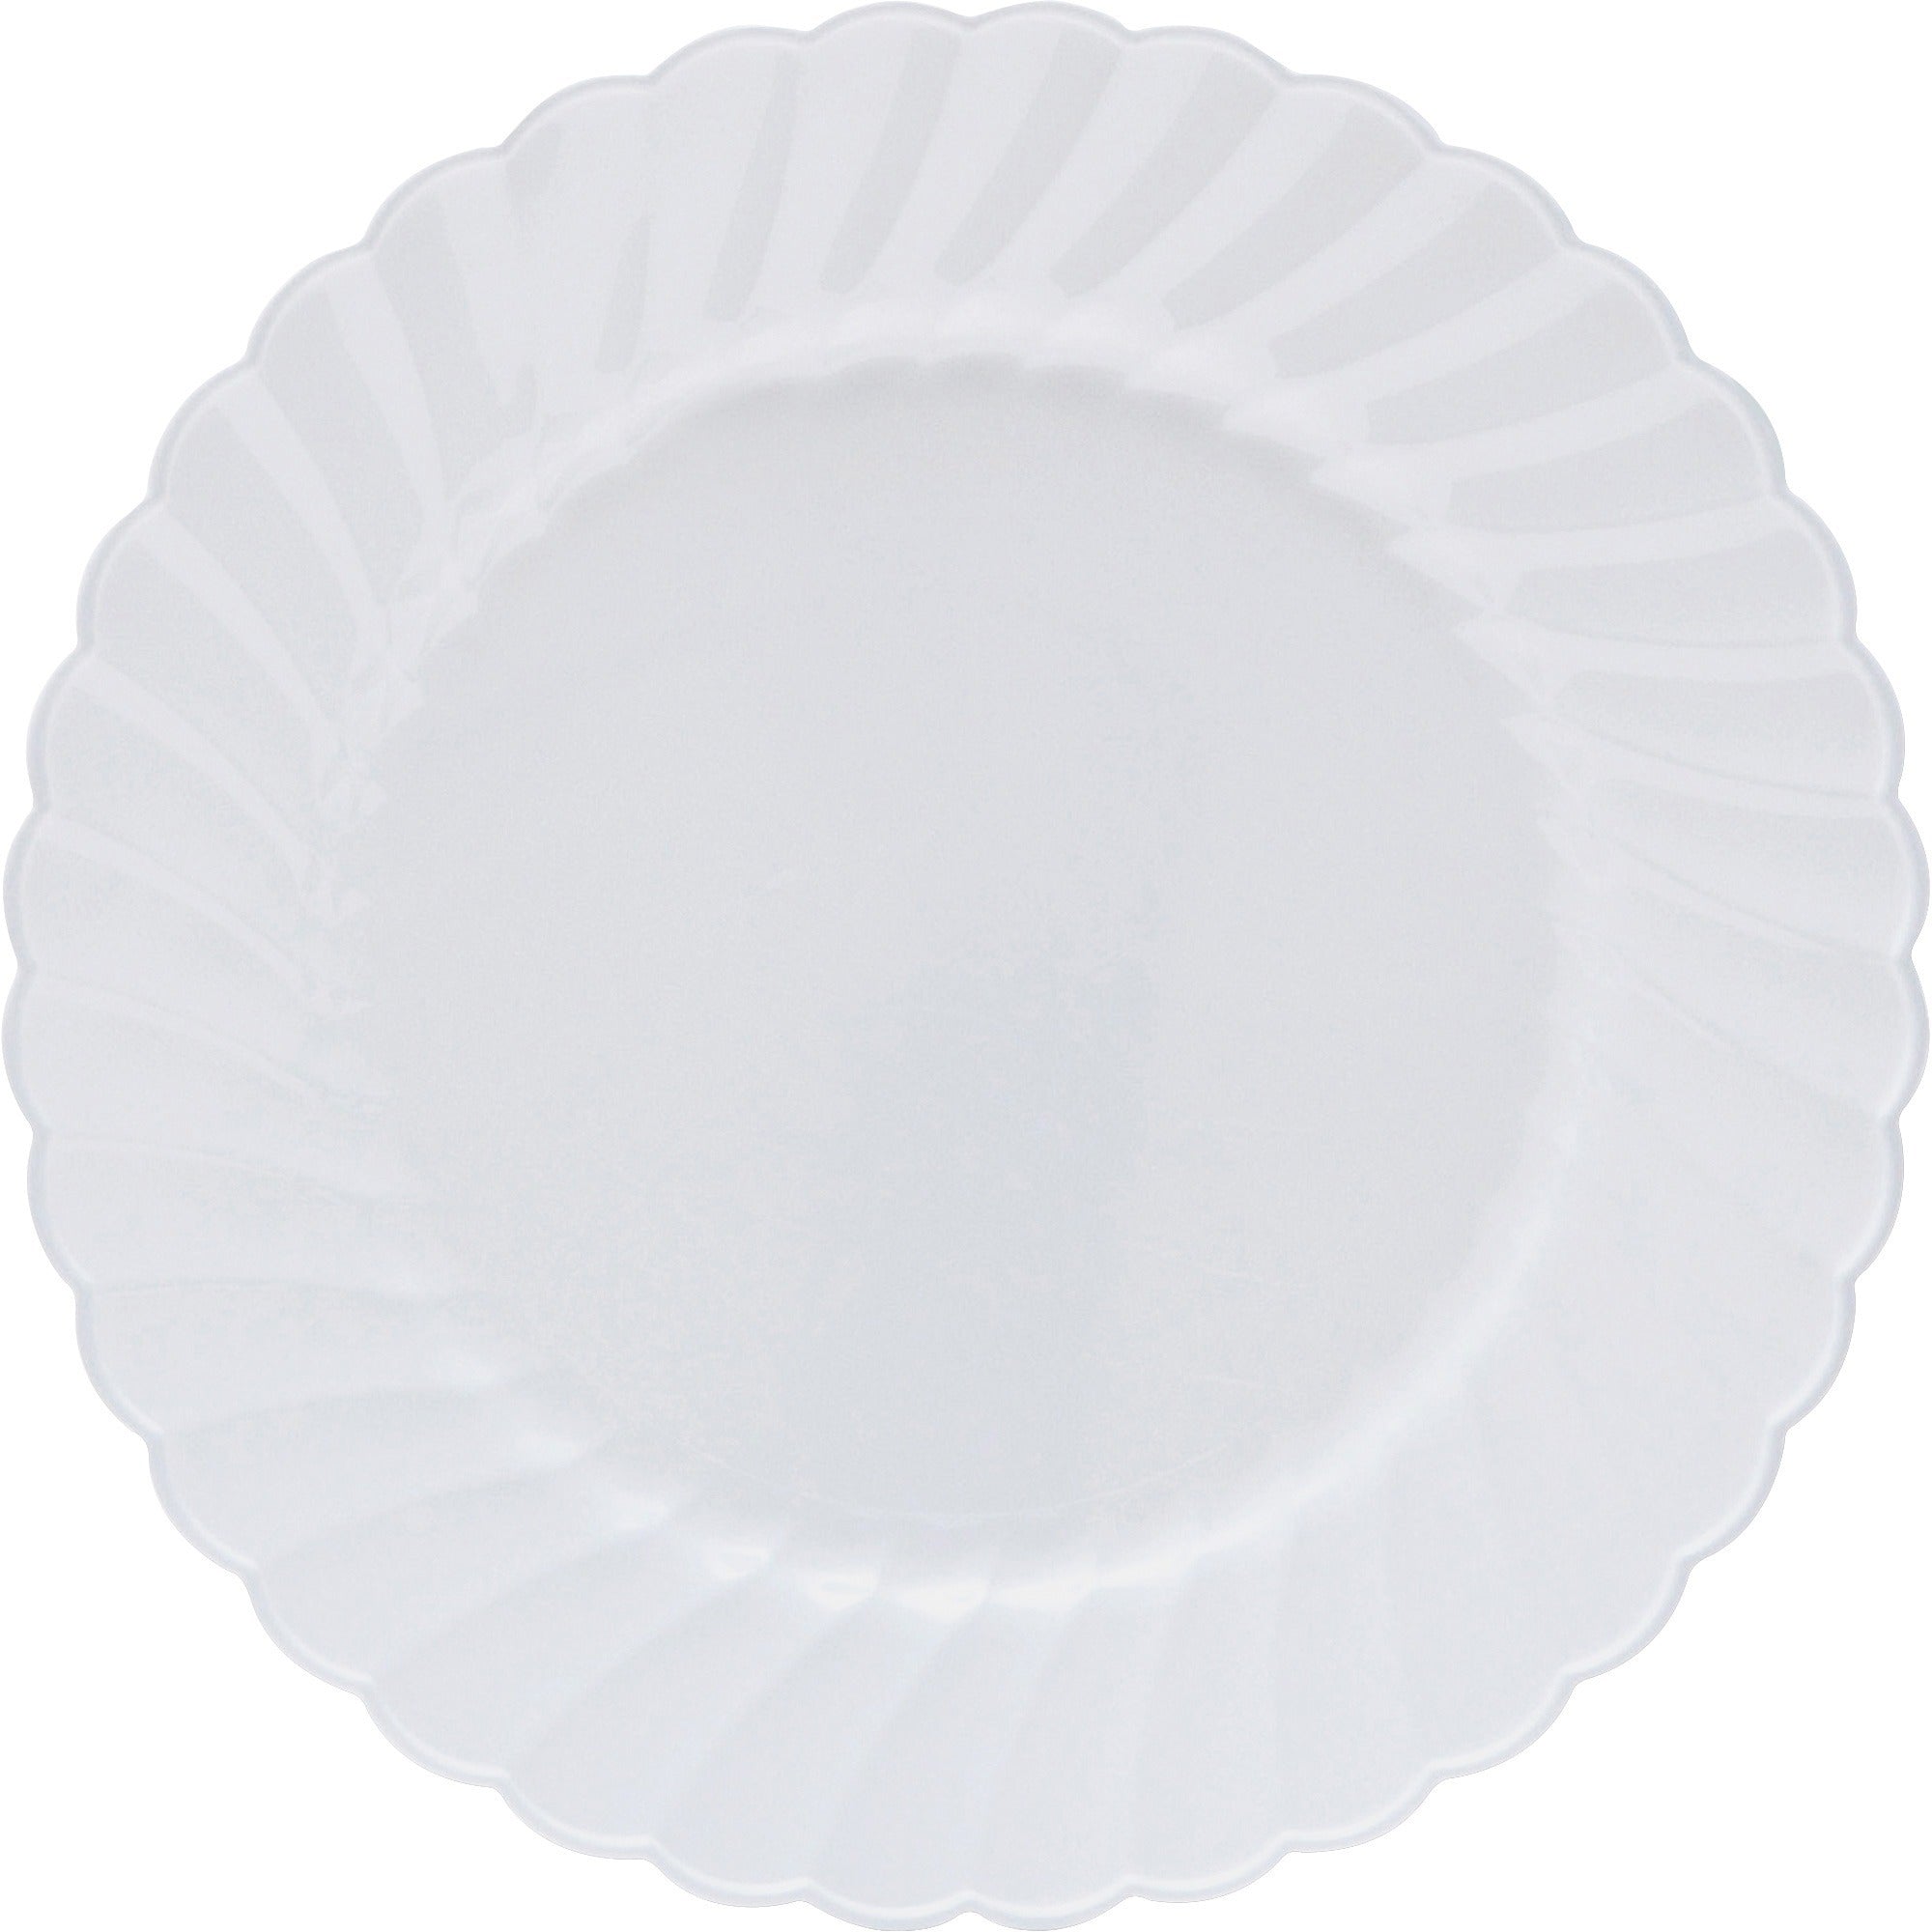 classicware-6-heavyweight-plates-12-pack-picnic-party-disposable-white-plastic-body-15-carton_wnarscw61512wct - 1